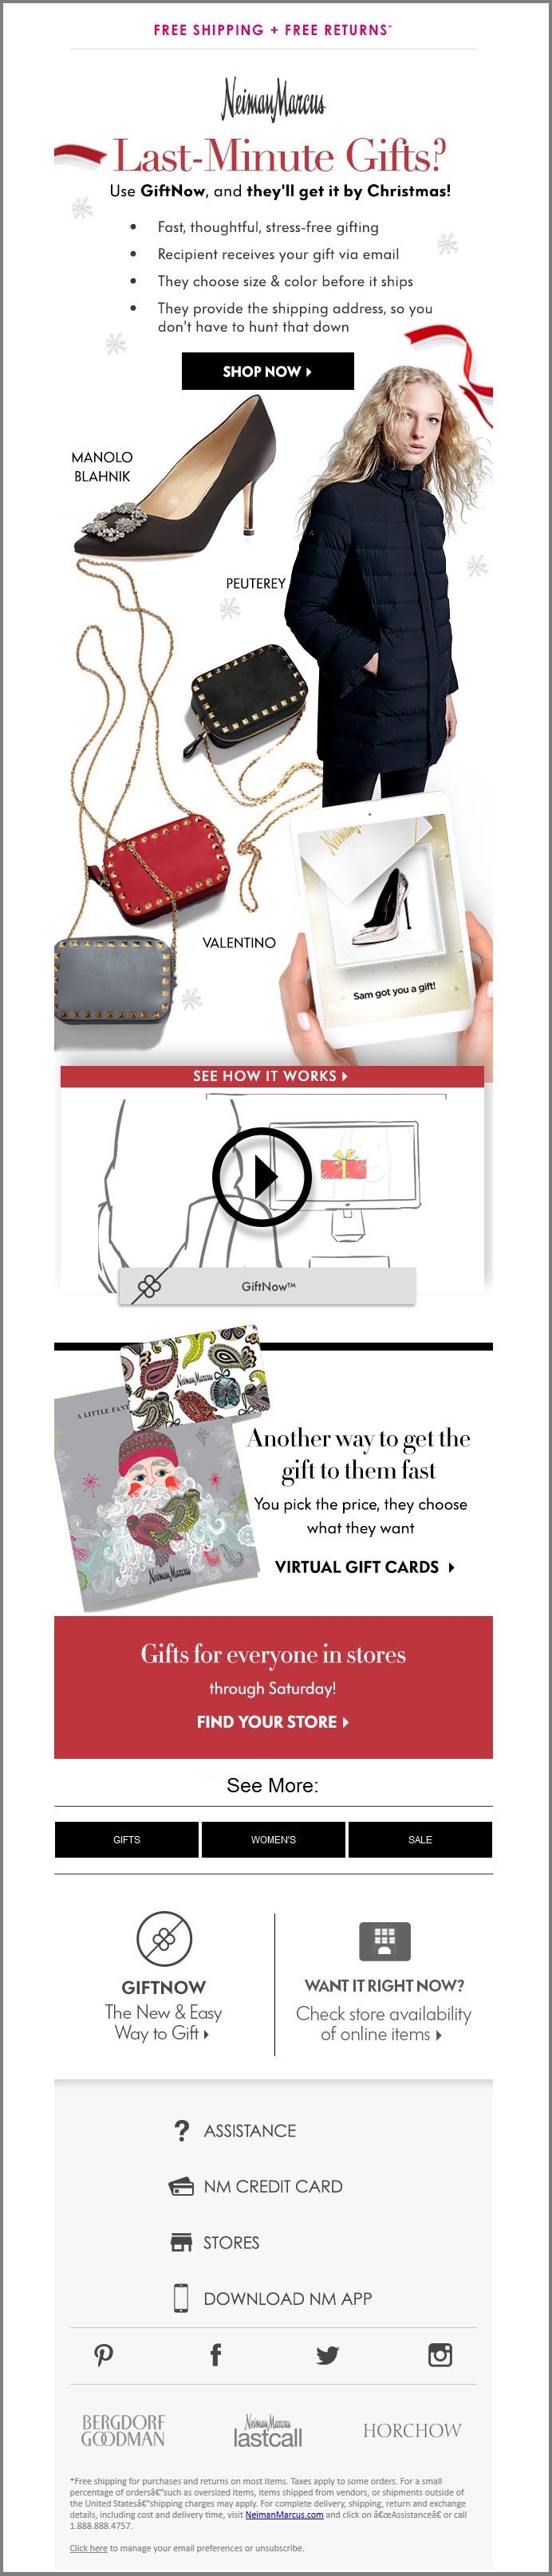 holiday-email-marketing-examples